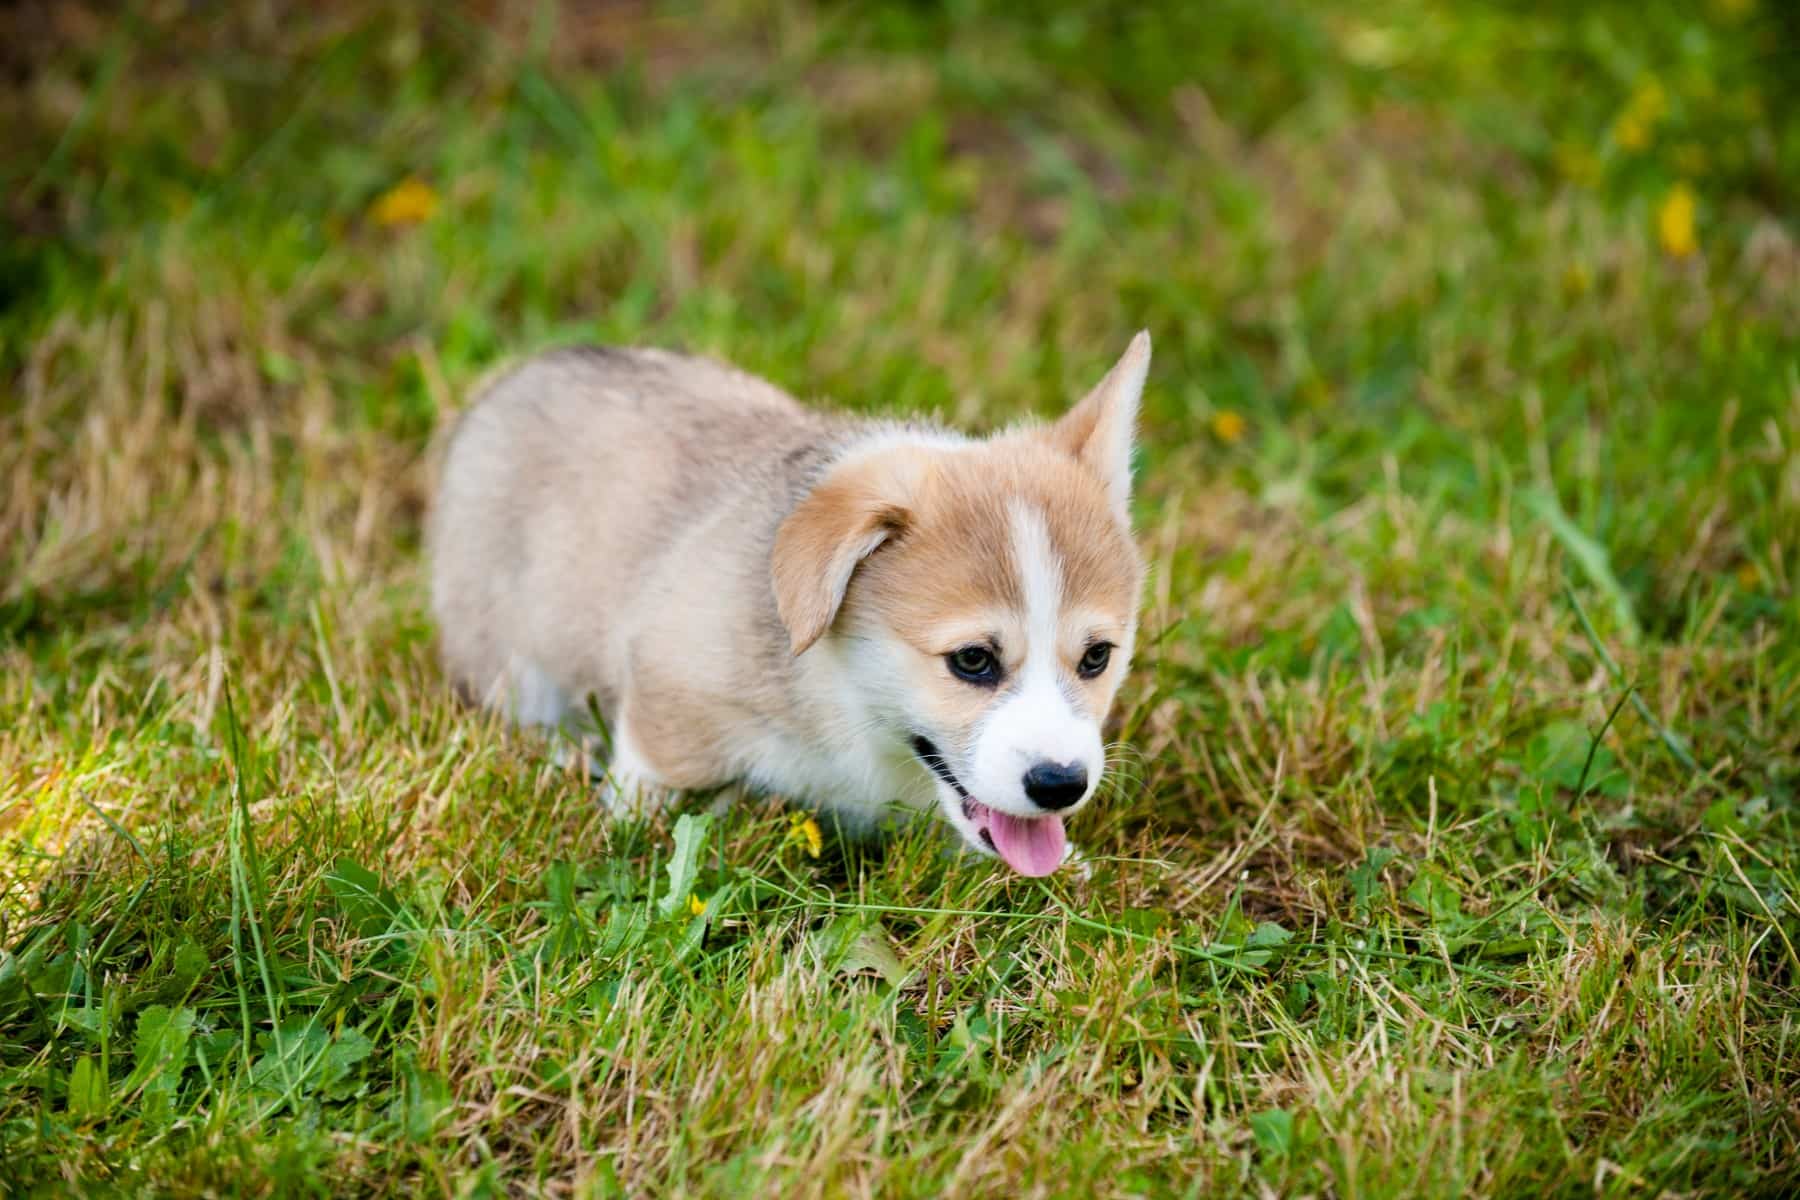 Why Does Everyone Want A Corgi? This Baby Corgi is Cute and Is Playing In The Grass. A Great Reason To Get One.